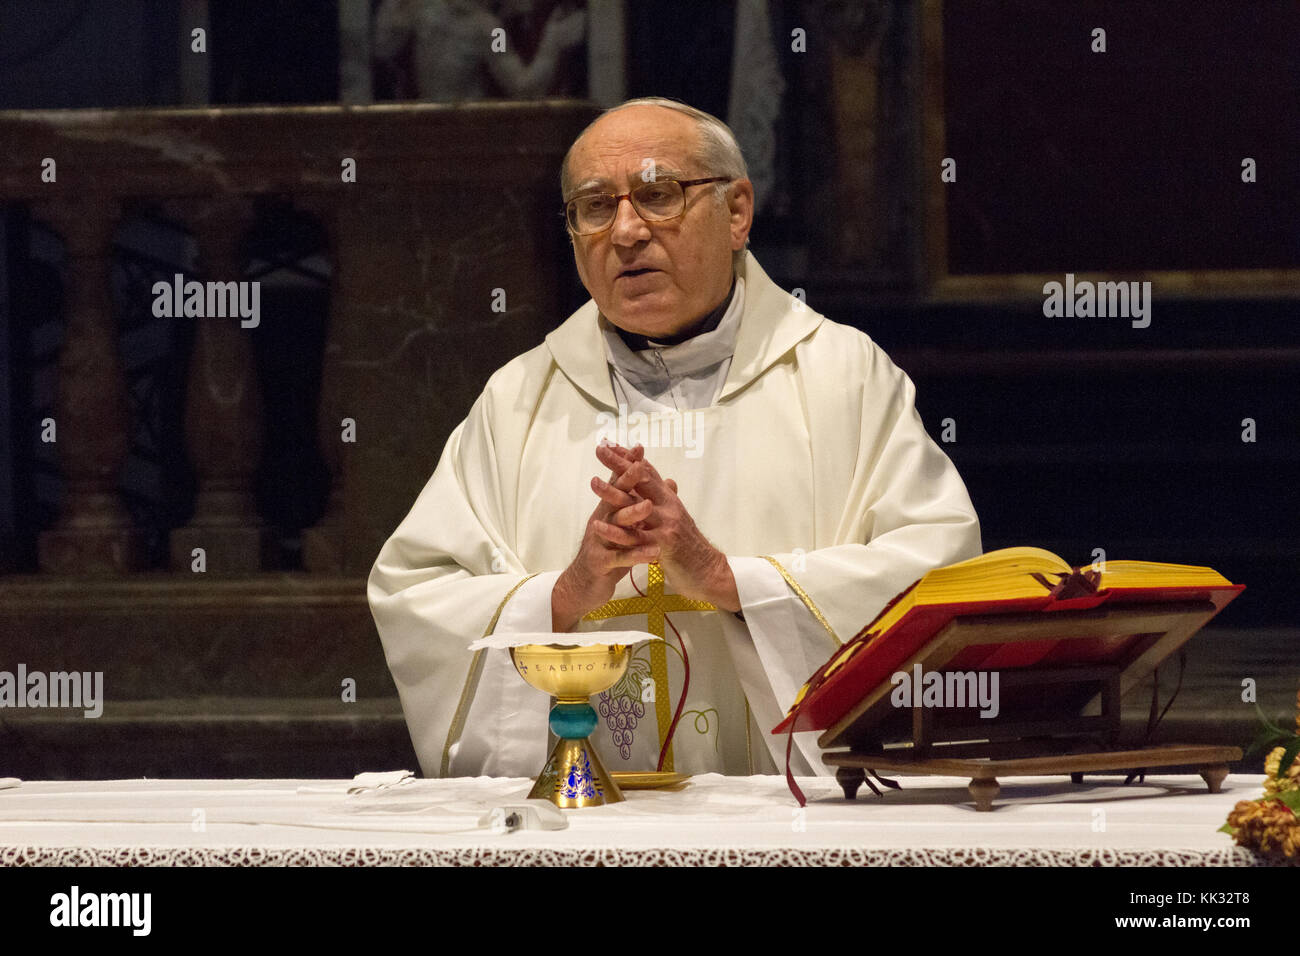 Pavia, Italy. November 11 2017. A priest celebrating a holy mass in Duomo di Pavia (Pavia Cathedral). He is praying over the bread and wine on the alt Stock Photo